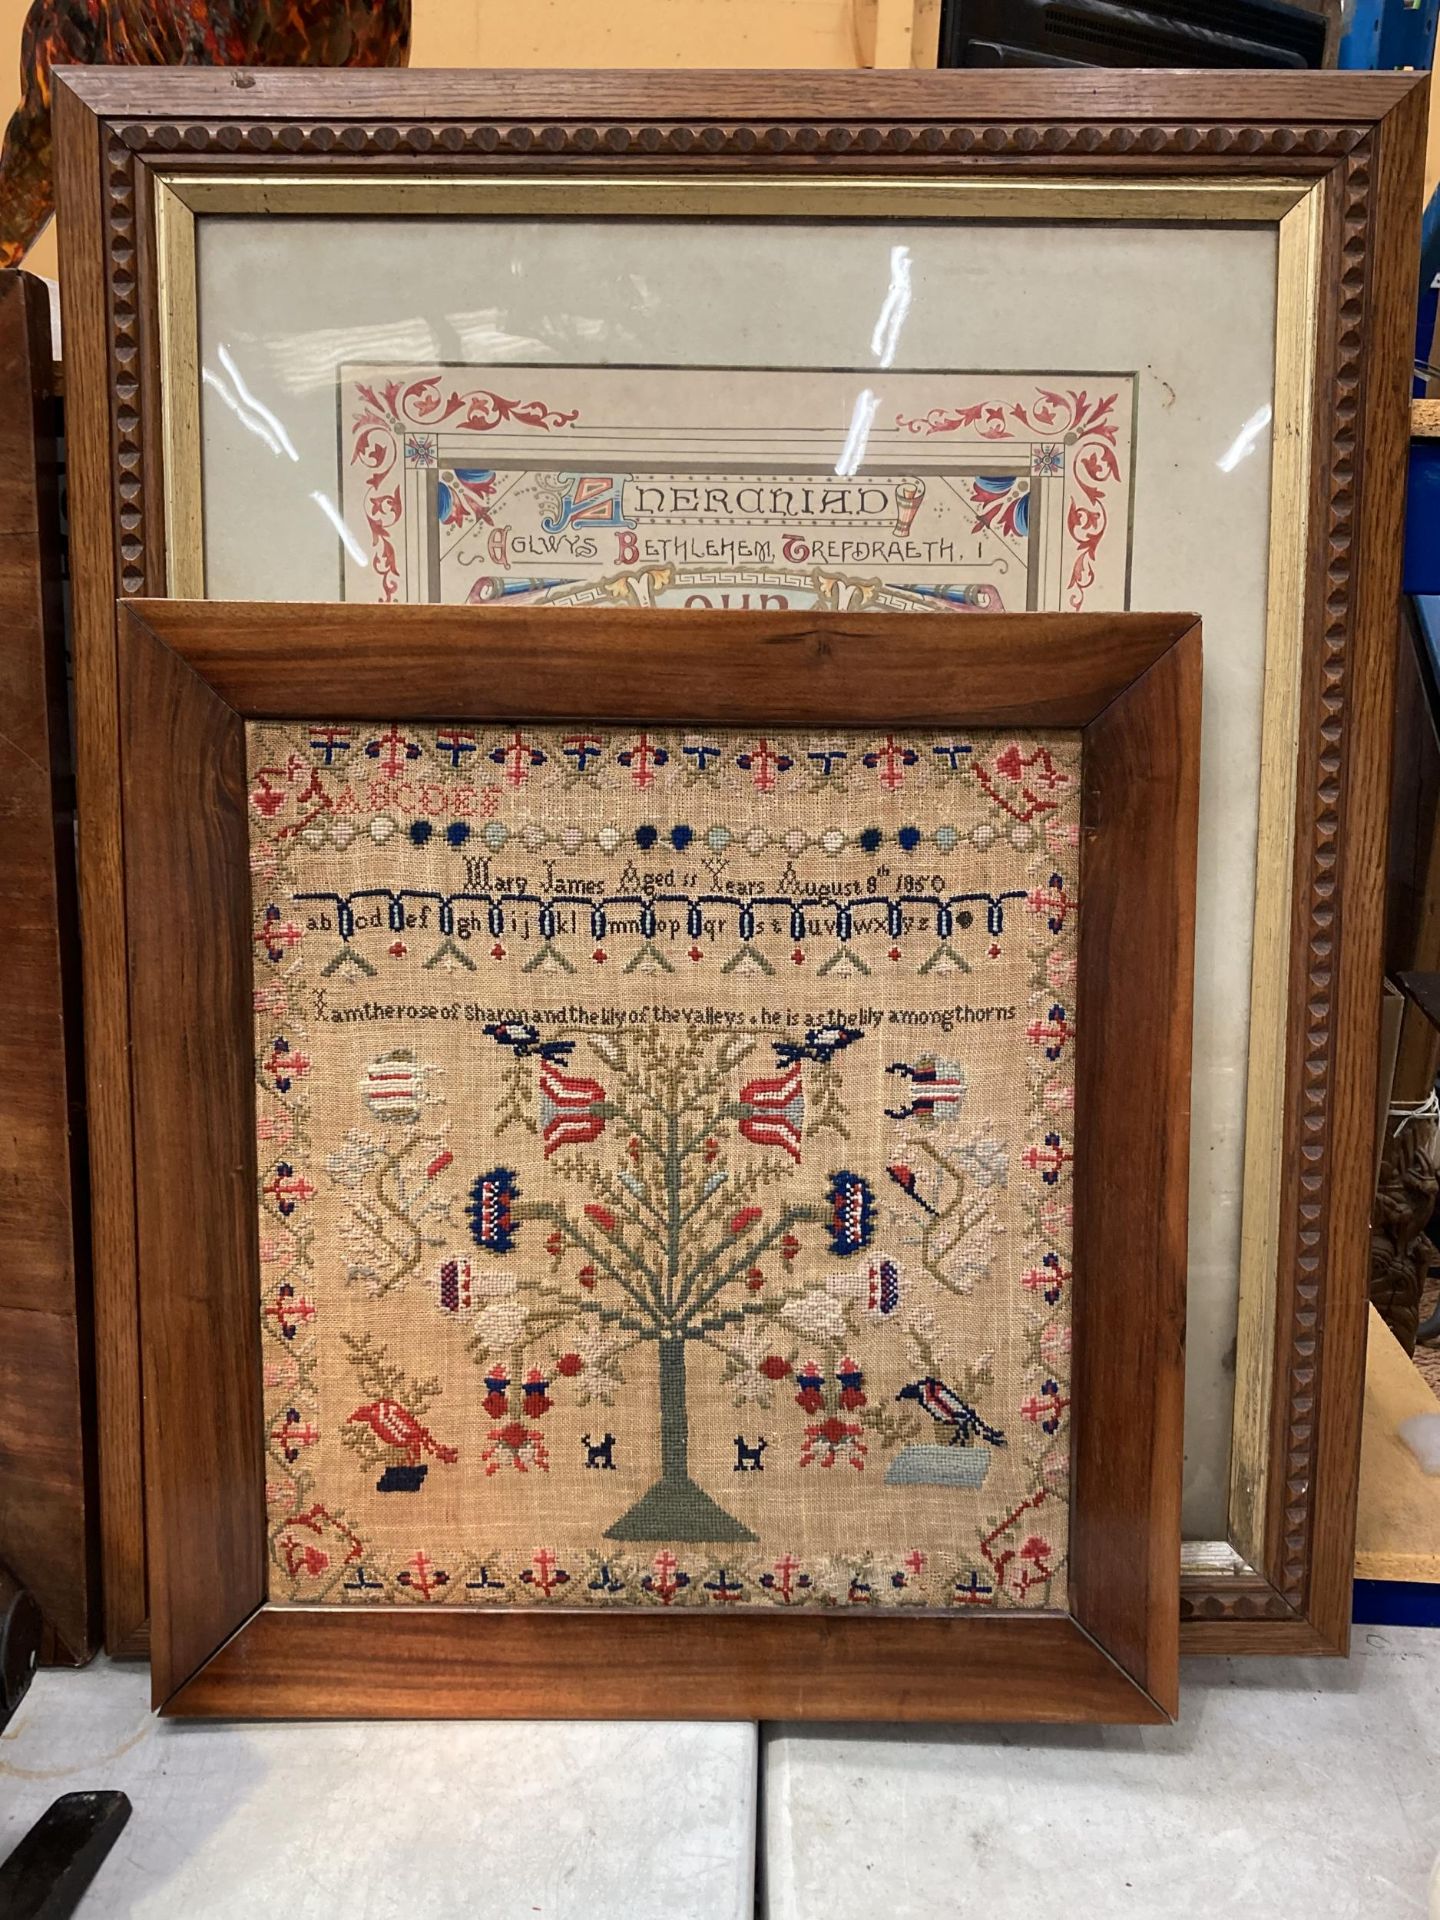 A WELSH NEEDLEWORK SAMPLER BY MARY JAMES AGED 11 YEARS, AUGUST 8TH 1850, 46CM X 42CM, IN A